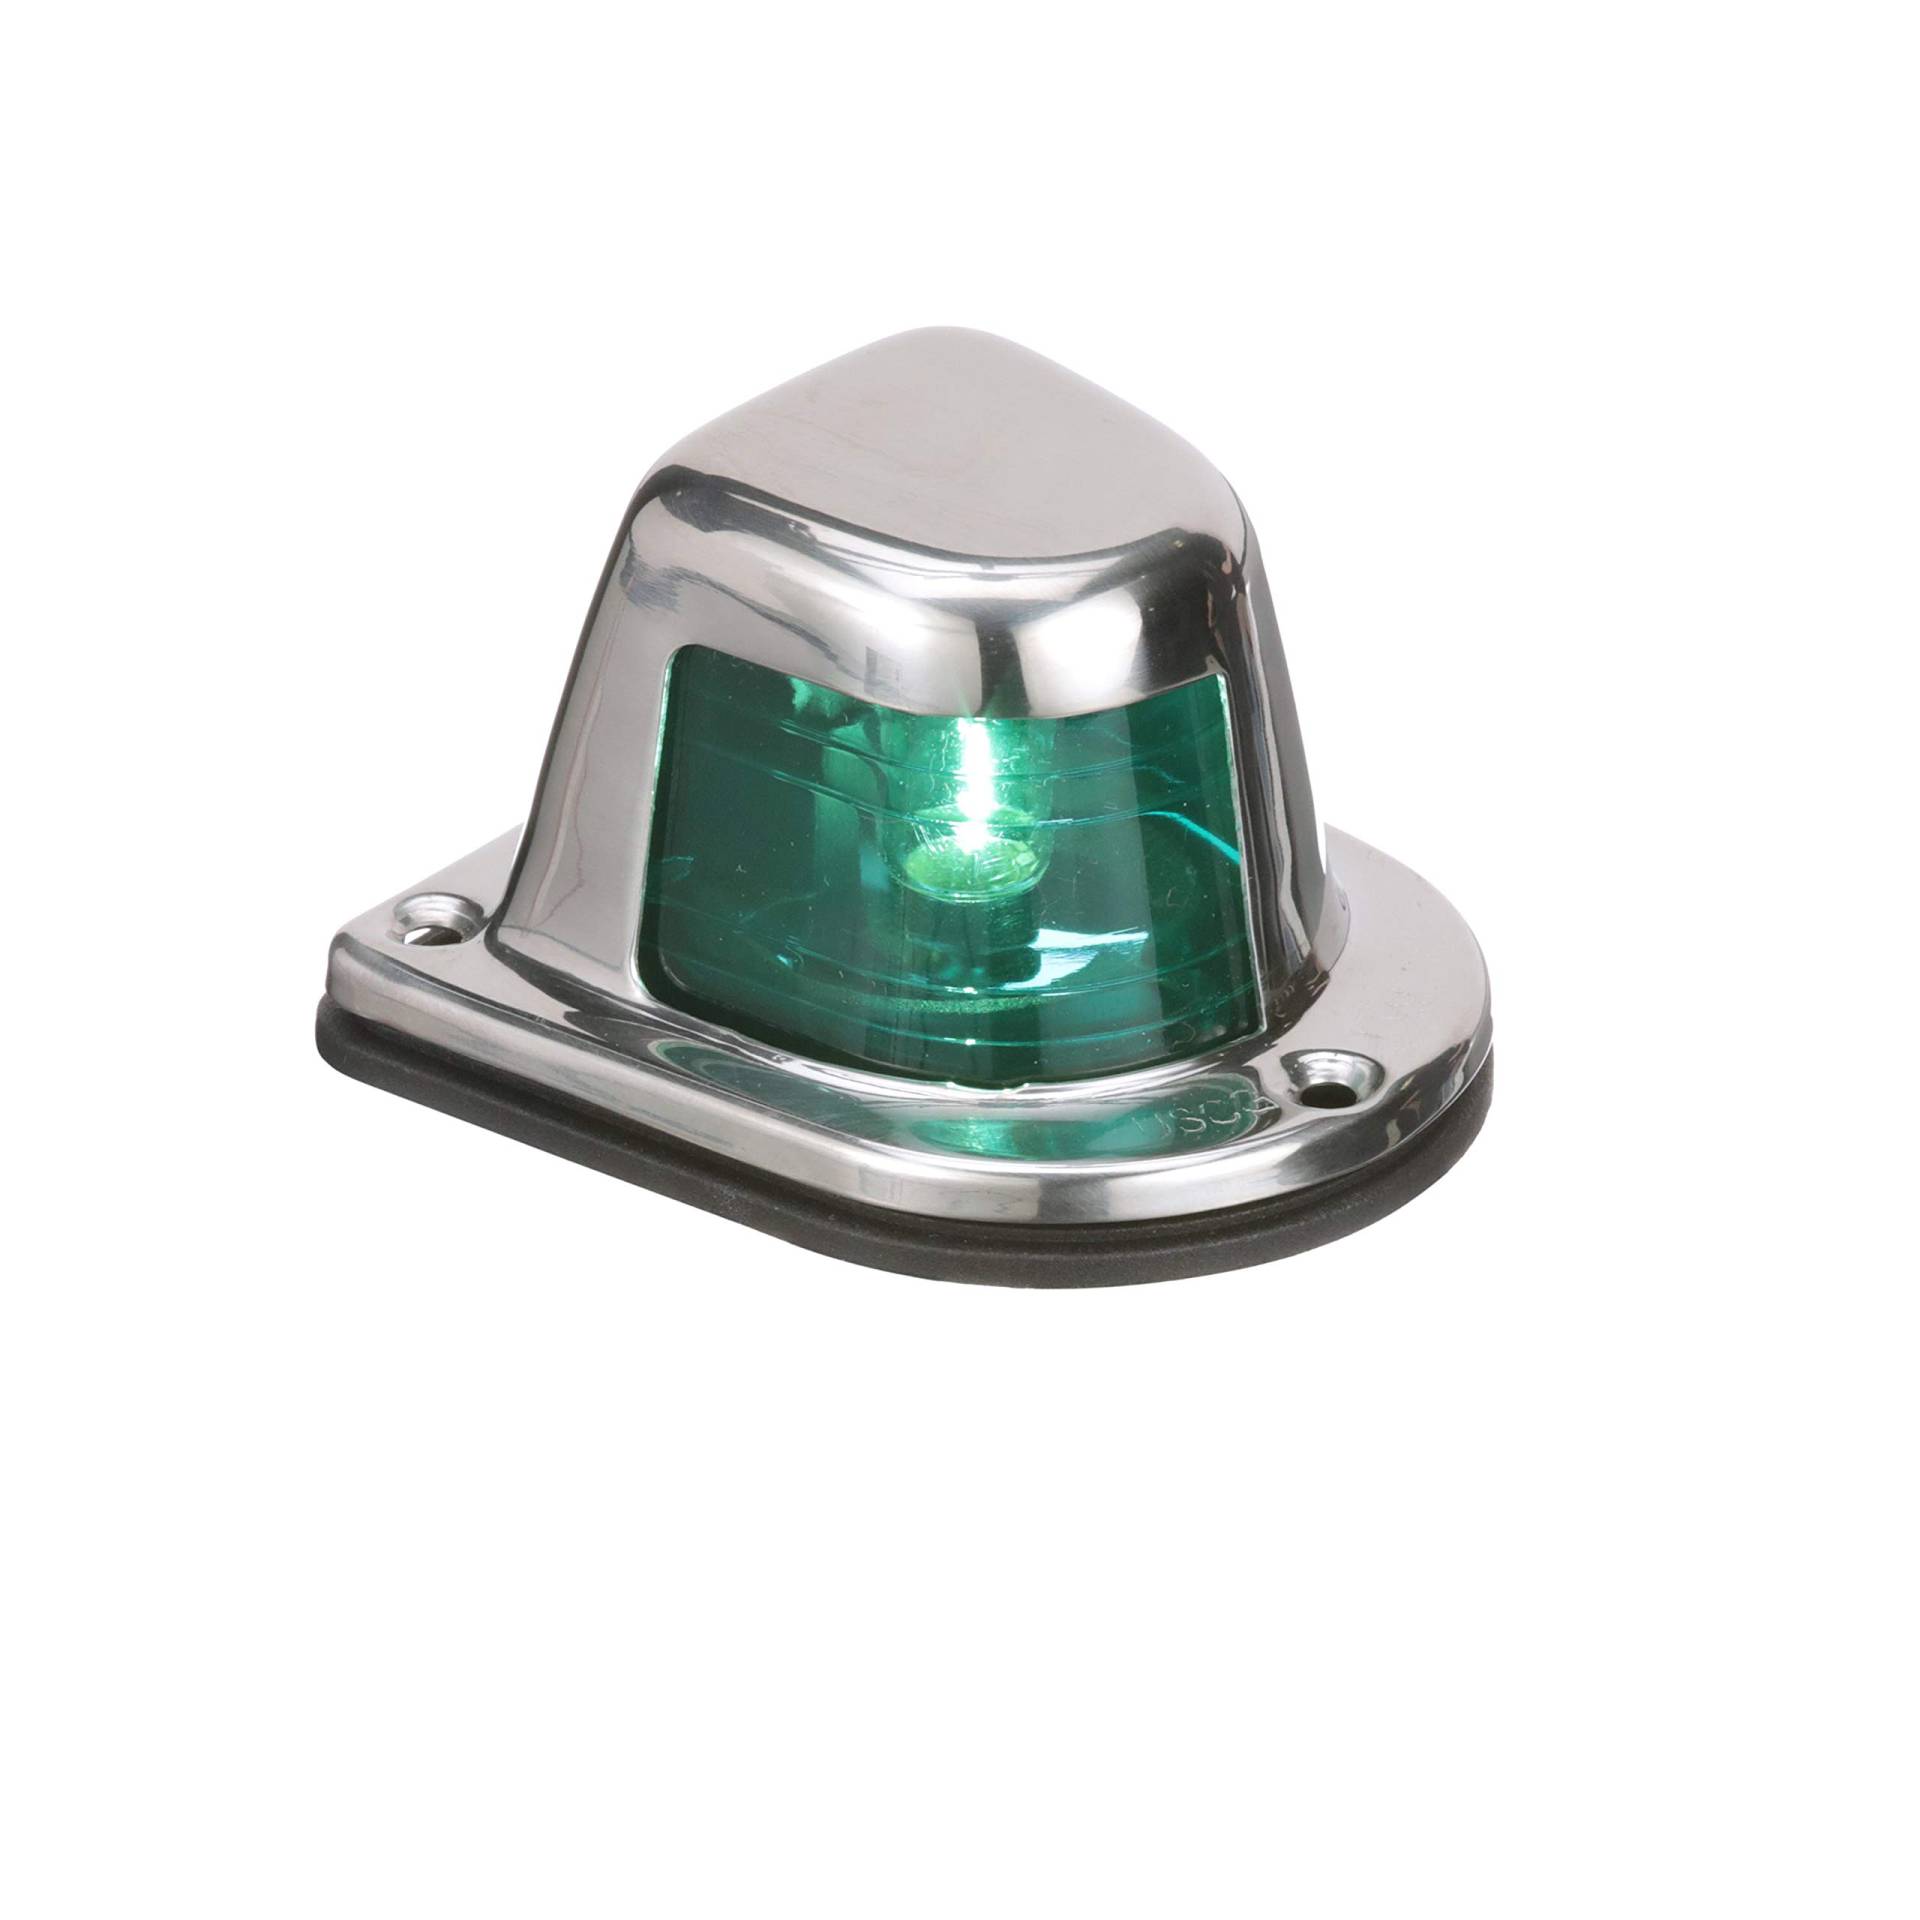 Attwood Sidelight Green 12 V W/Stainless House One Mile von attwood